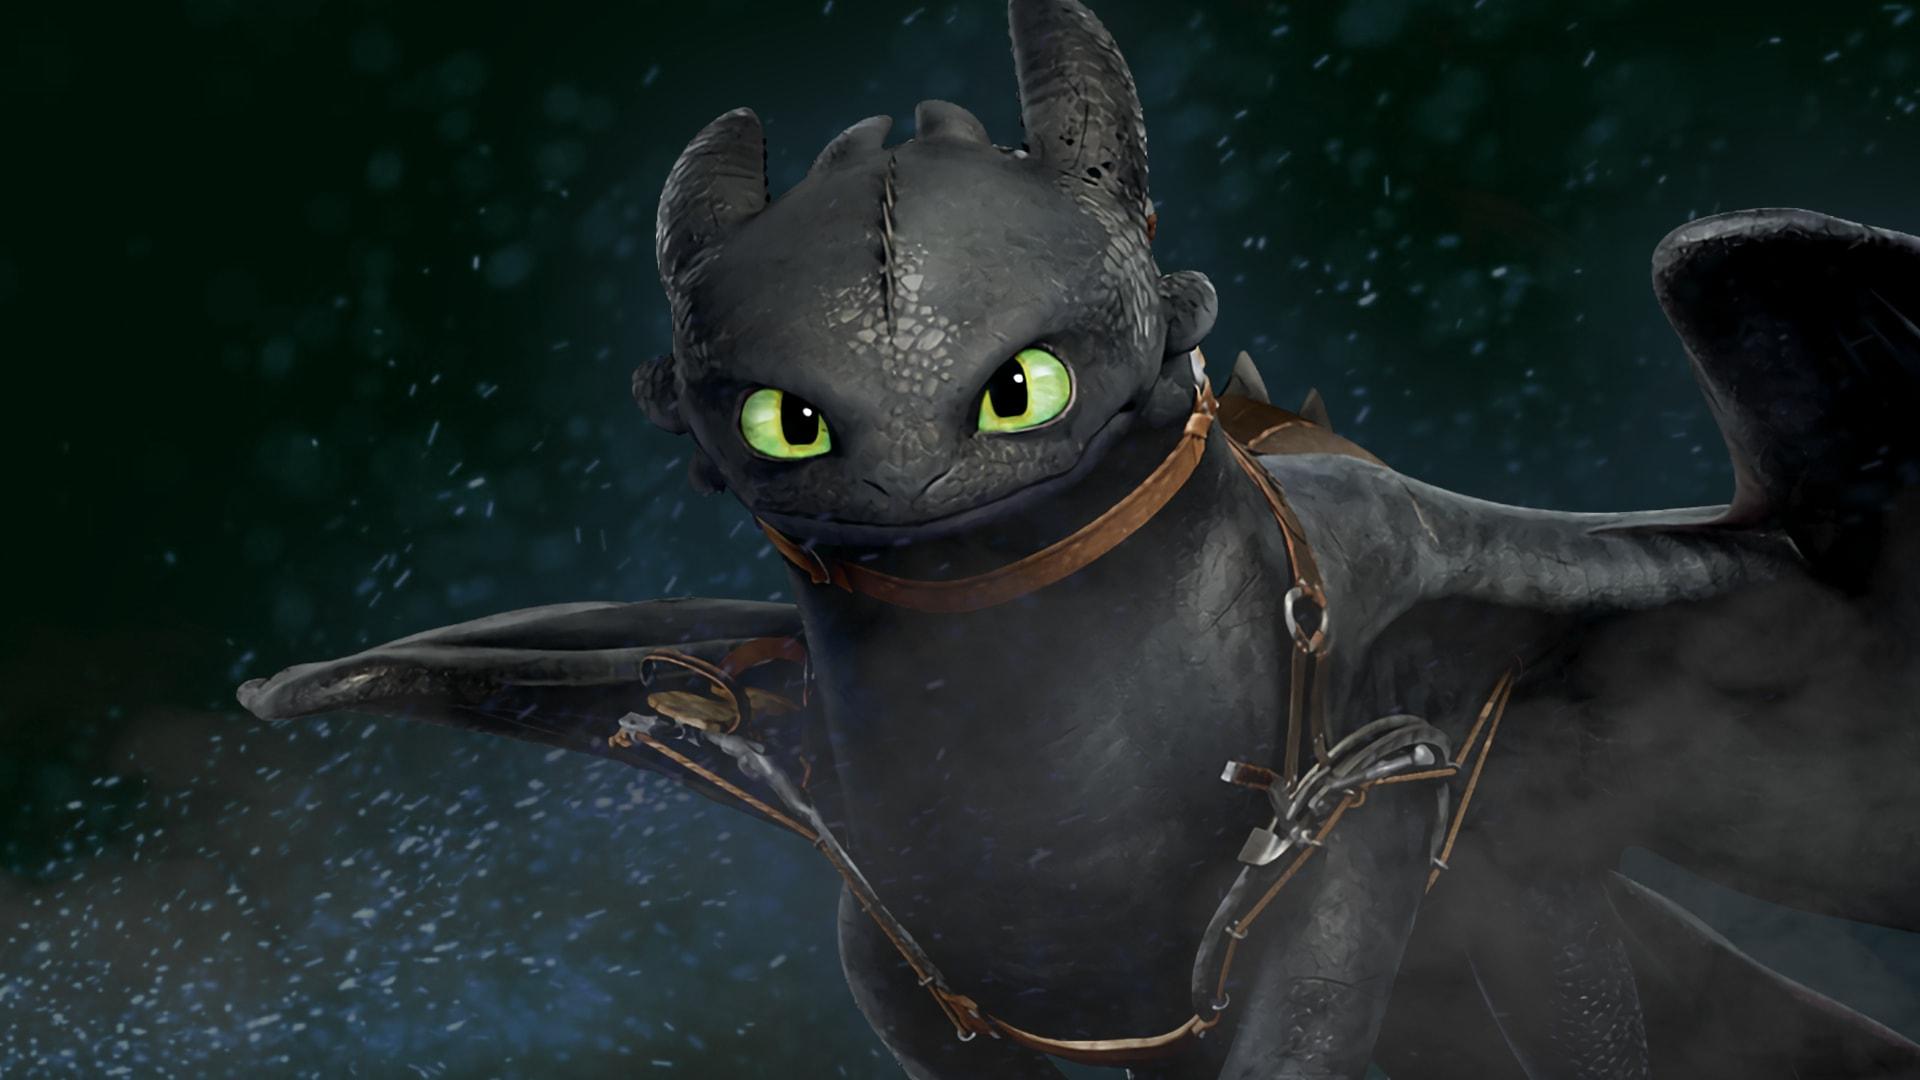 Wallpapers of Toothless, How to Train Your Dragon backgrounds.